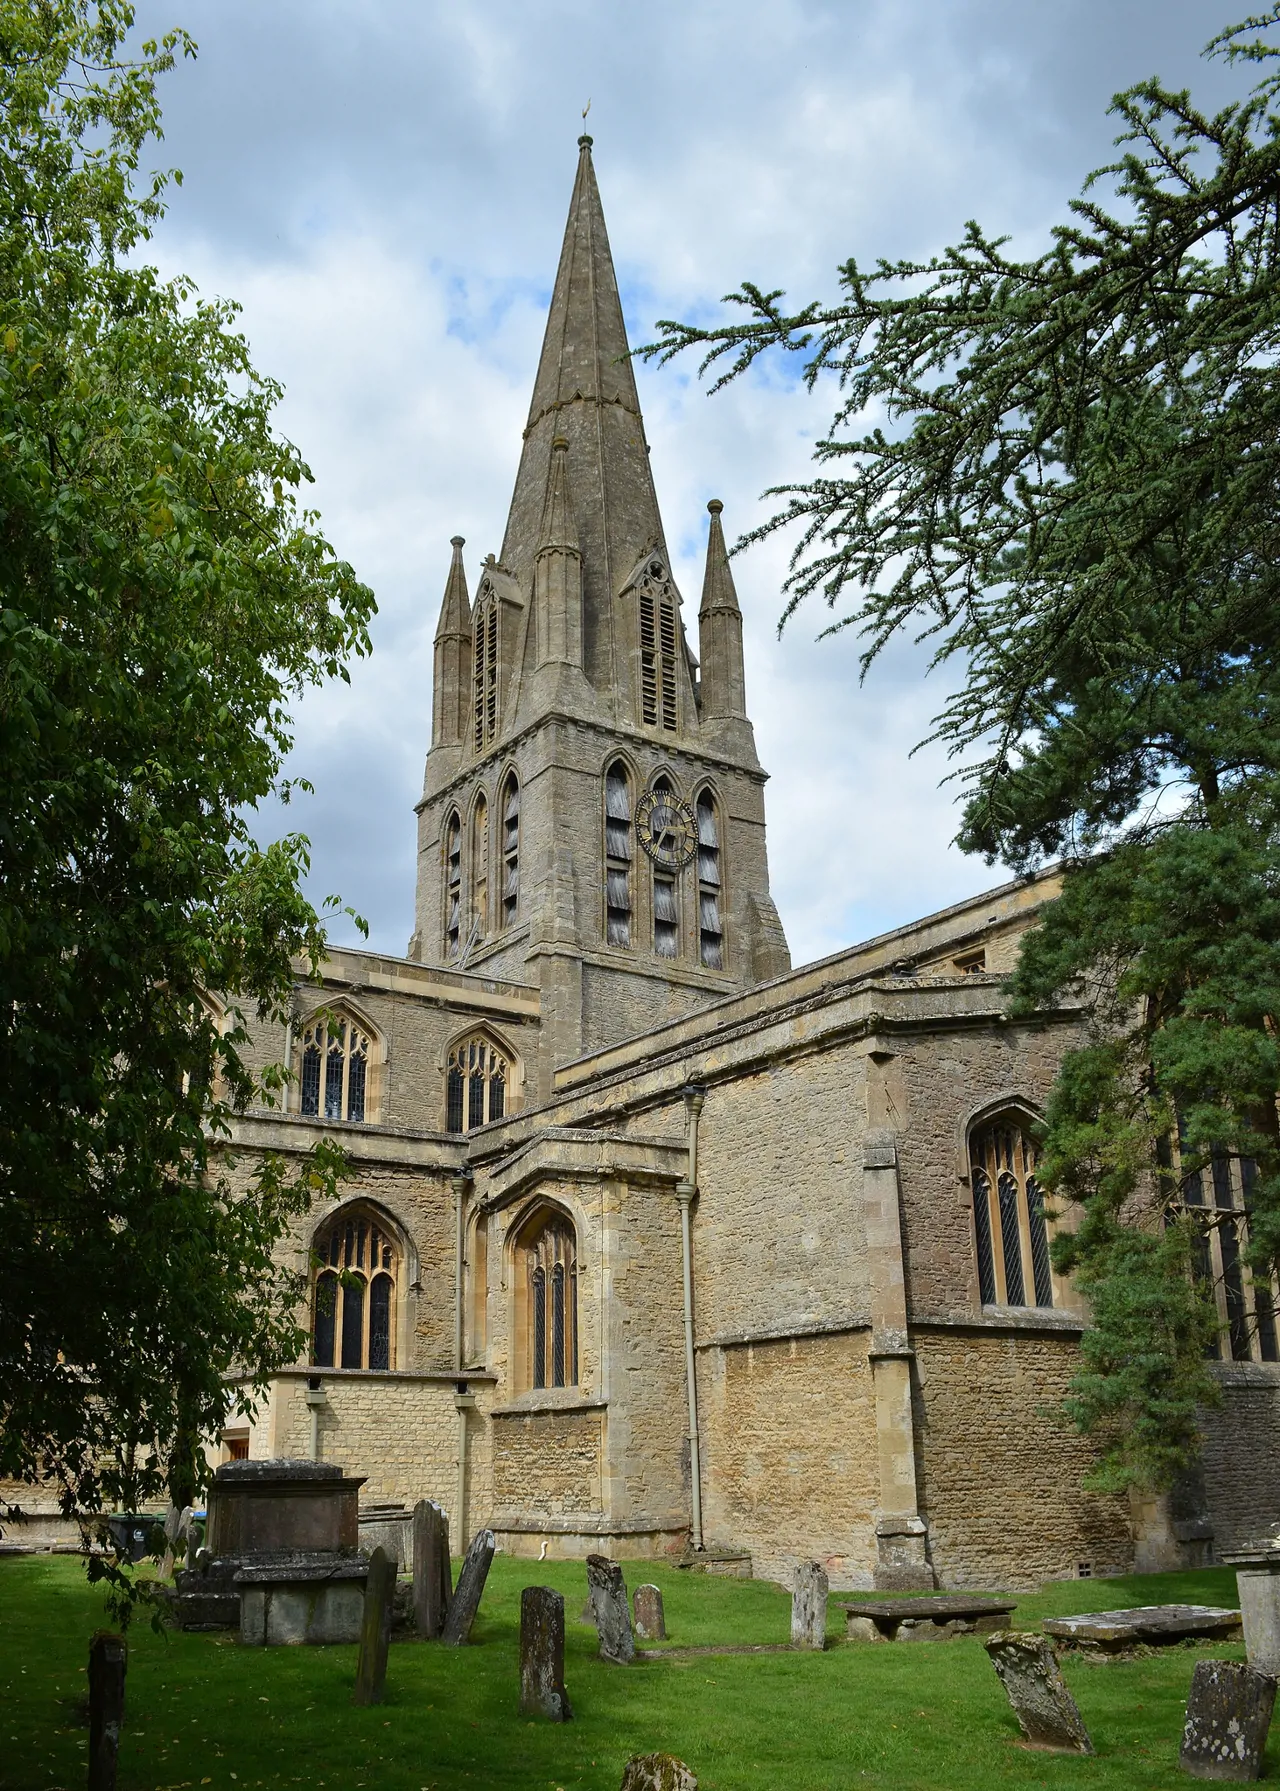 St Mary's church in Witney, Oxfordshire